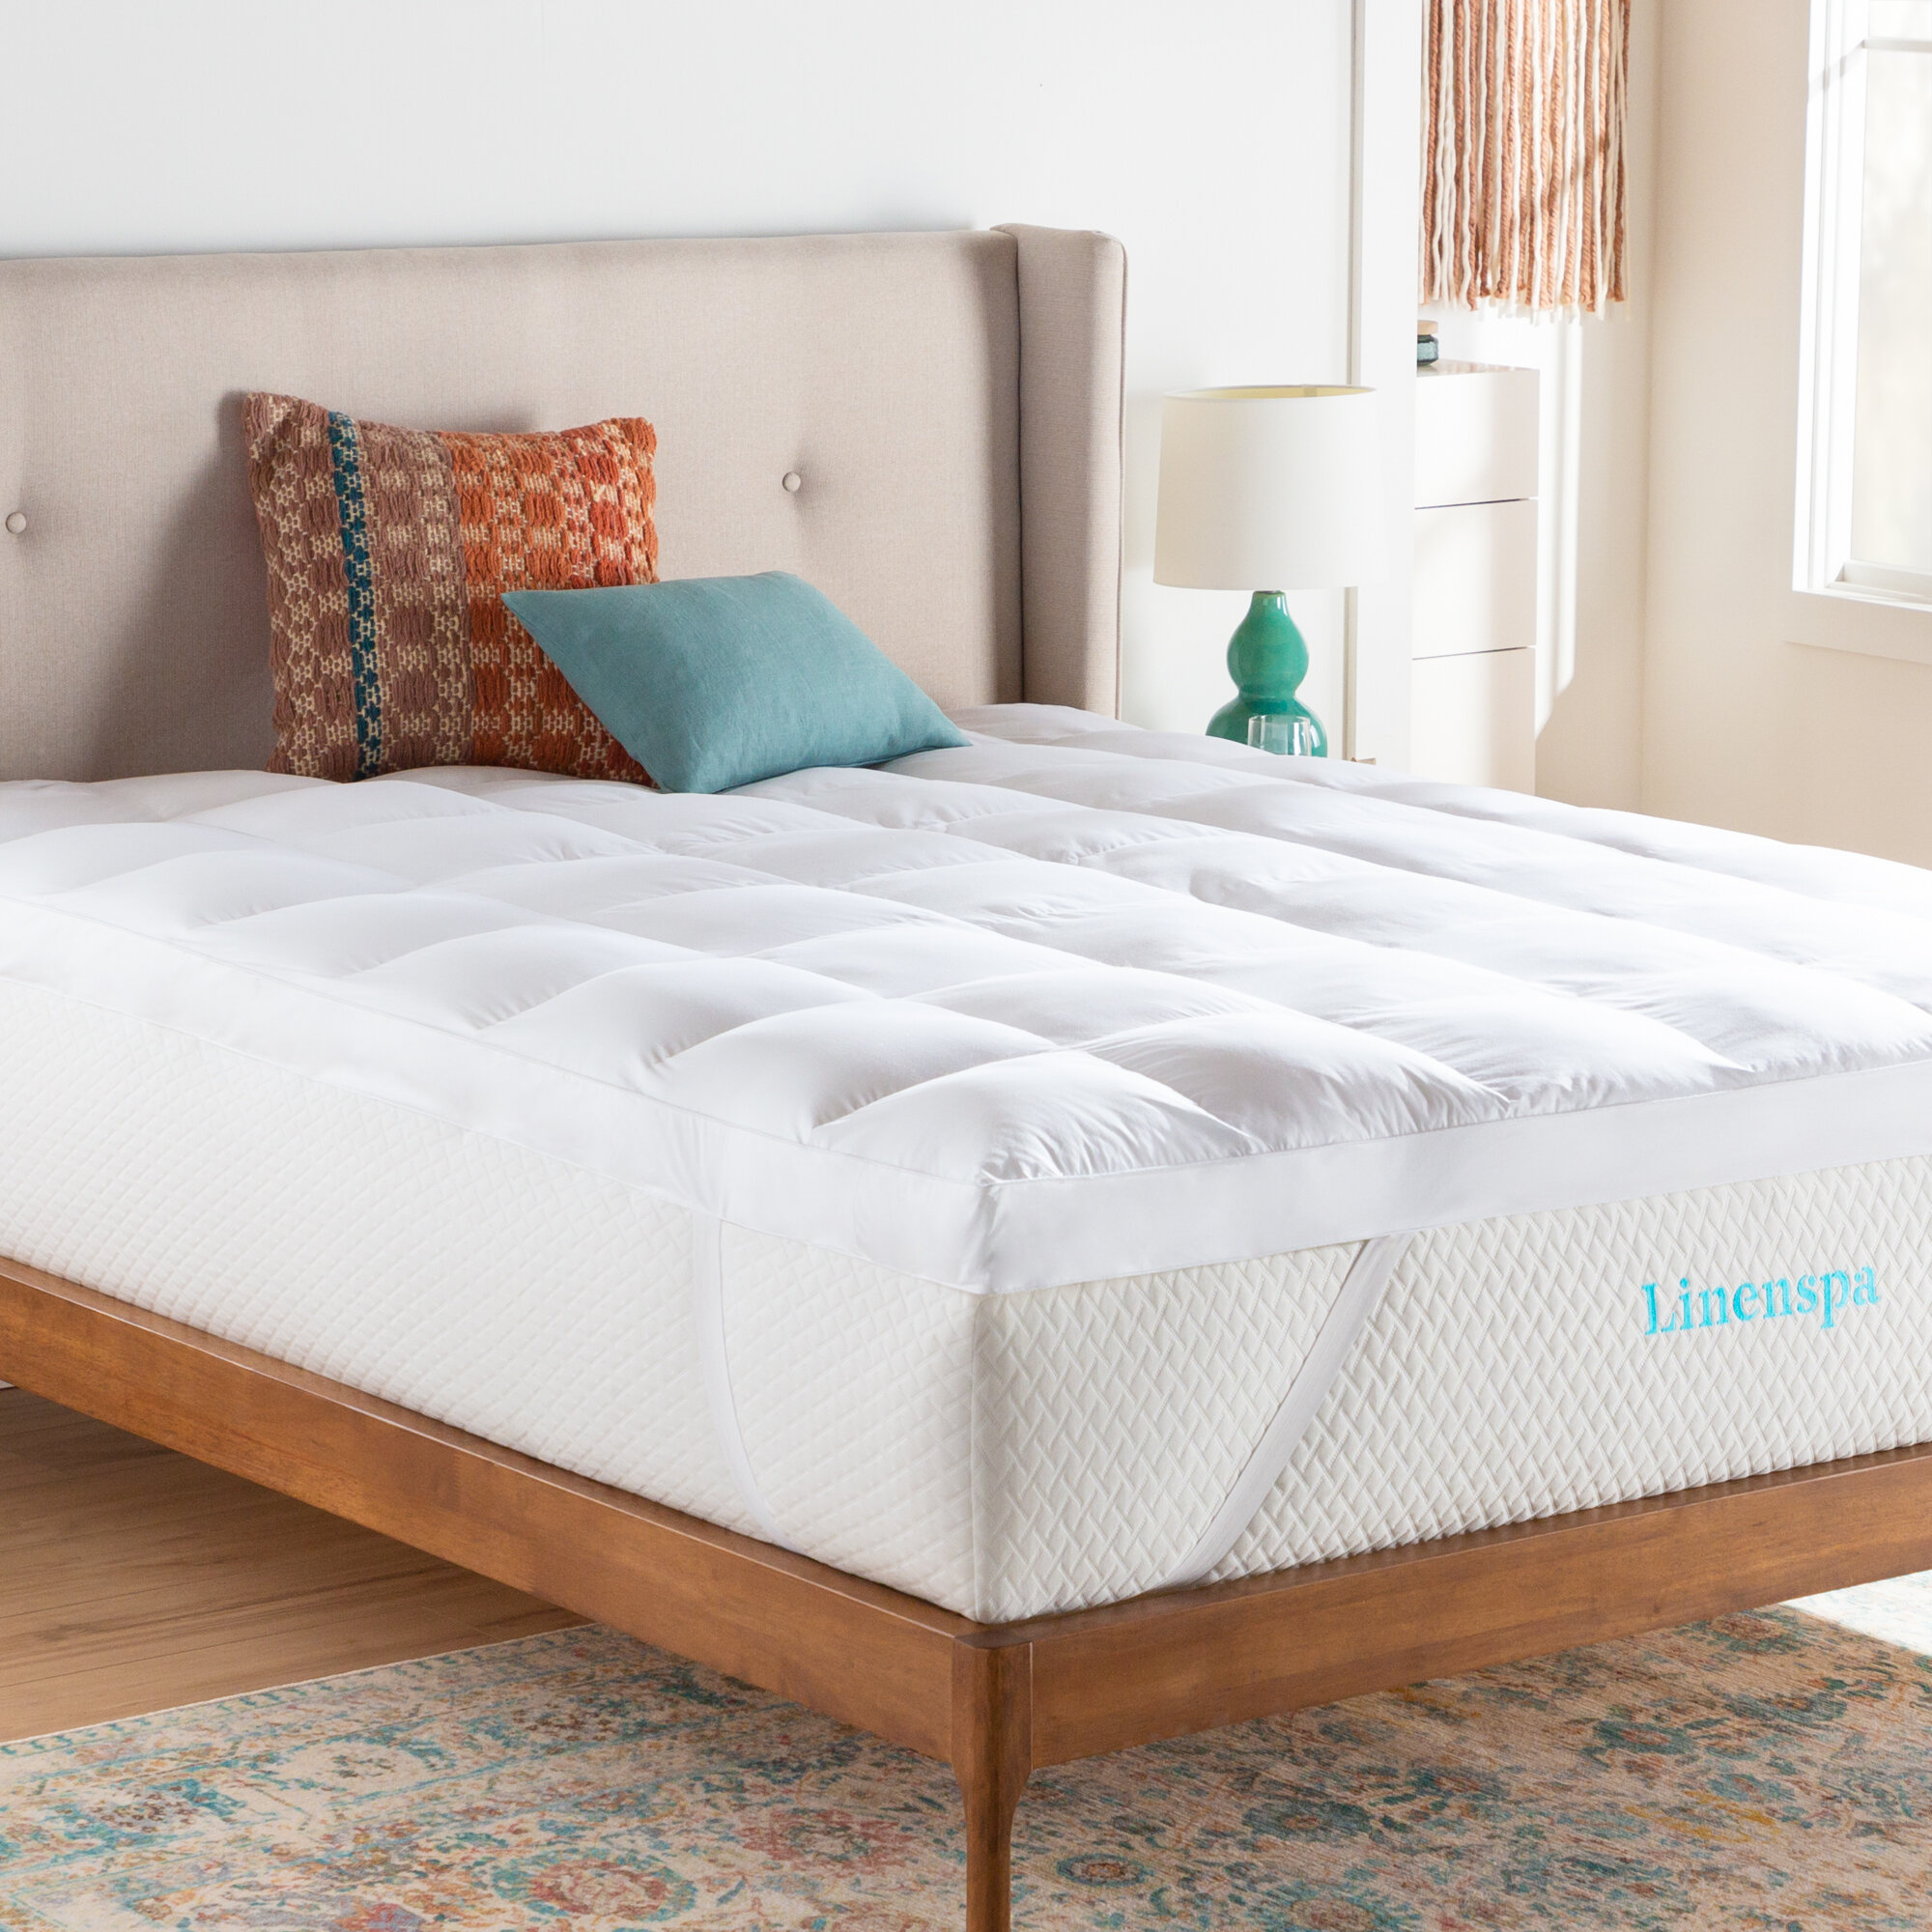 Linenspa 3 Inch Memory Foam Mattress Topper Cover–Keeps Topper Clean and  Safe–Ma